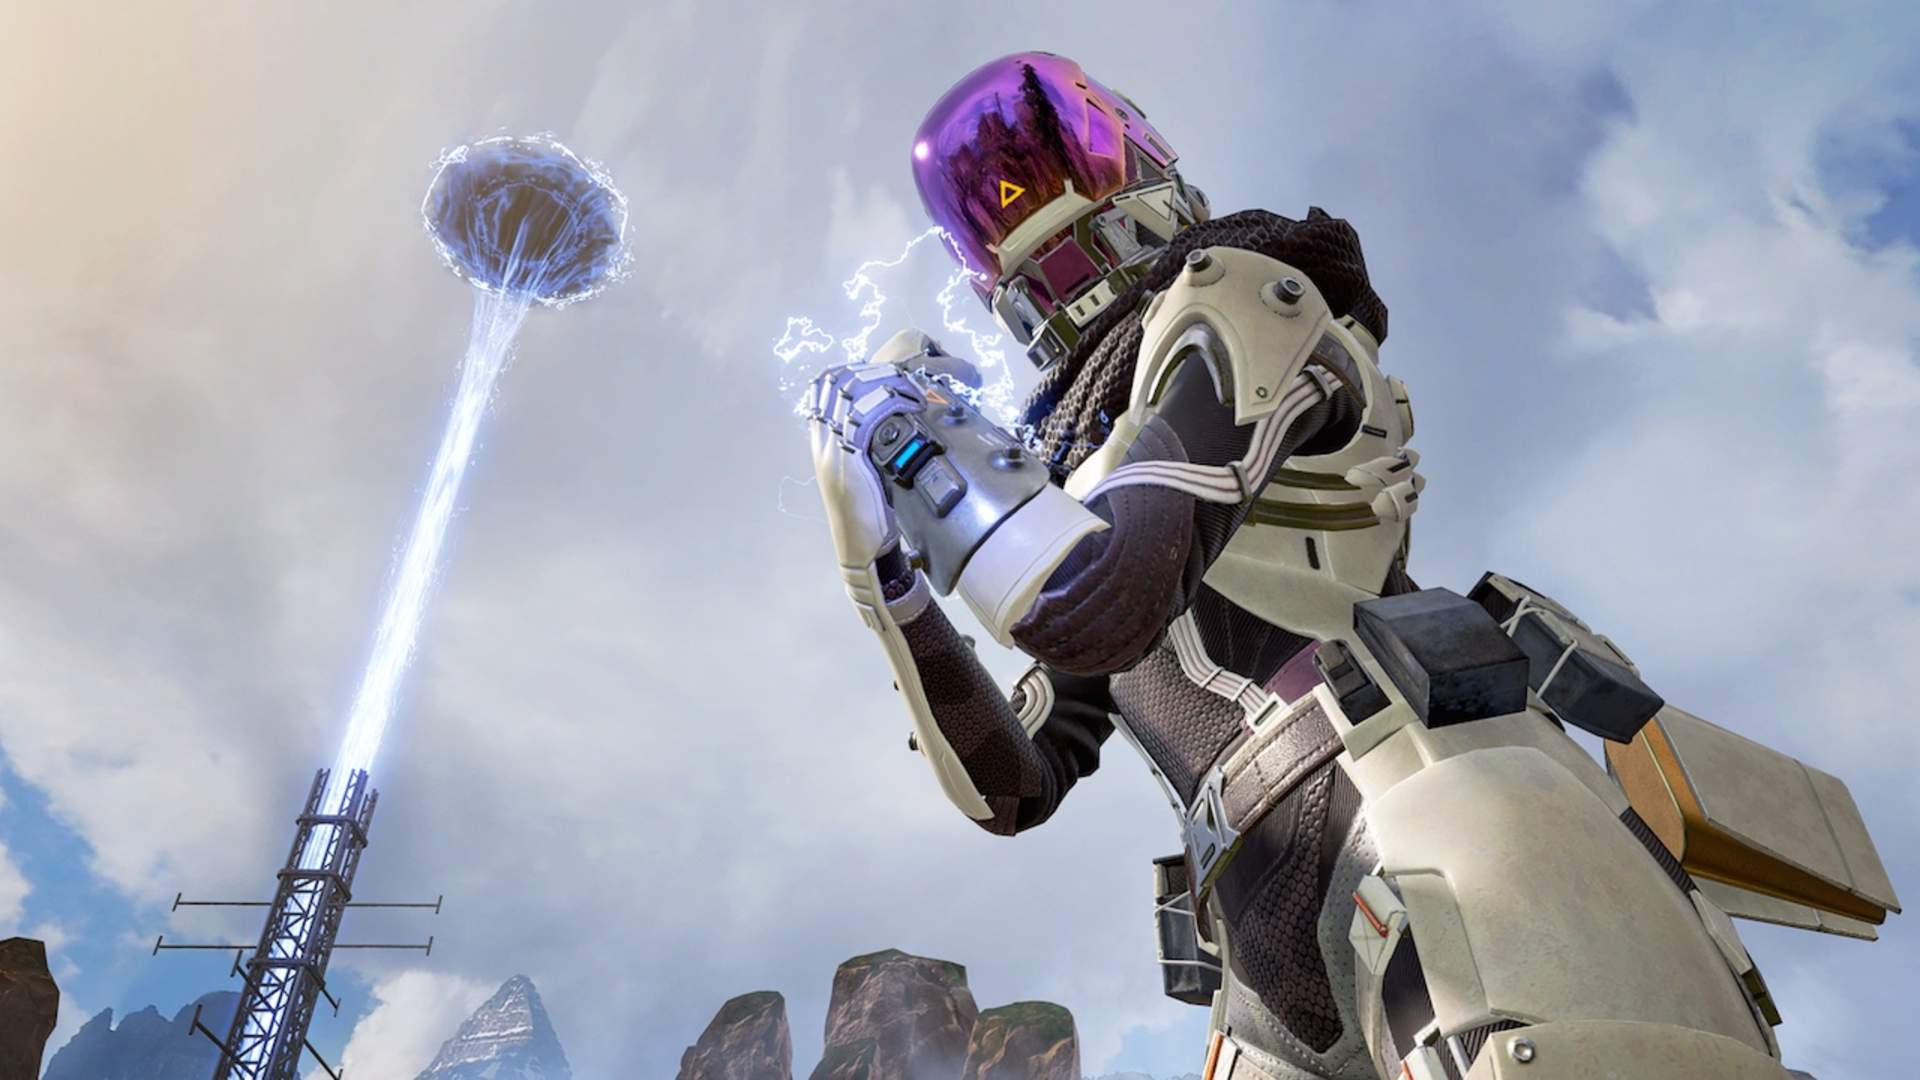 Apex Legends' Wraith Themed Voidwalker Event Will Bring New Lore And Loot